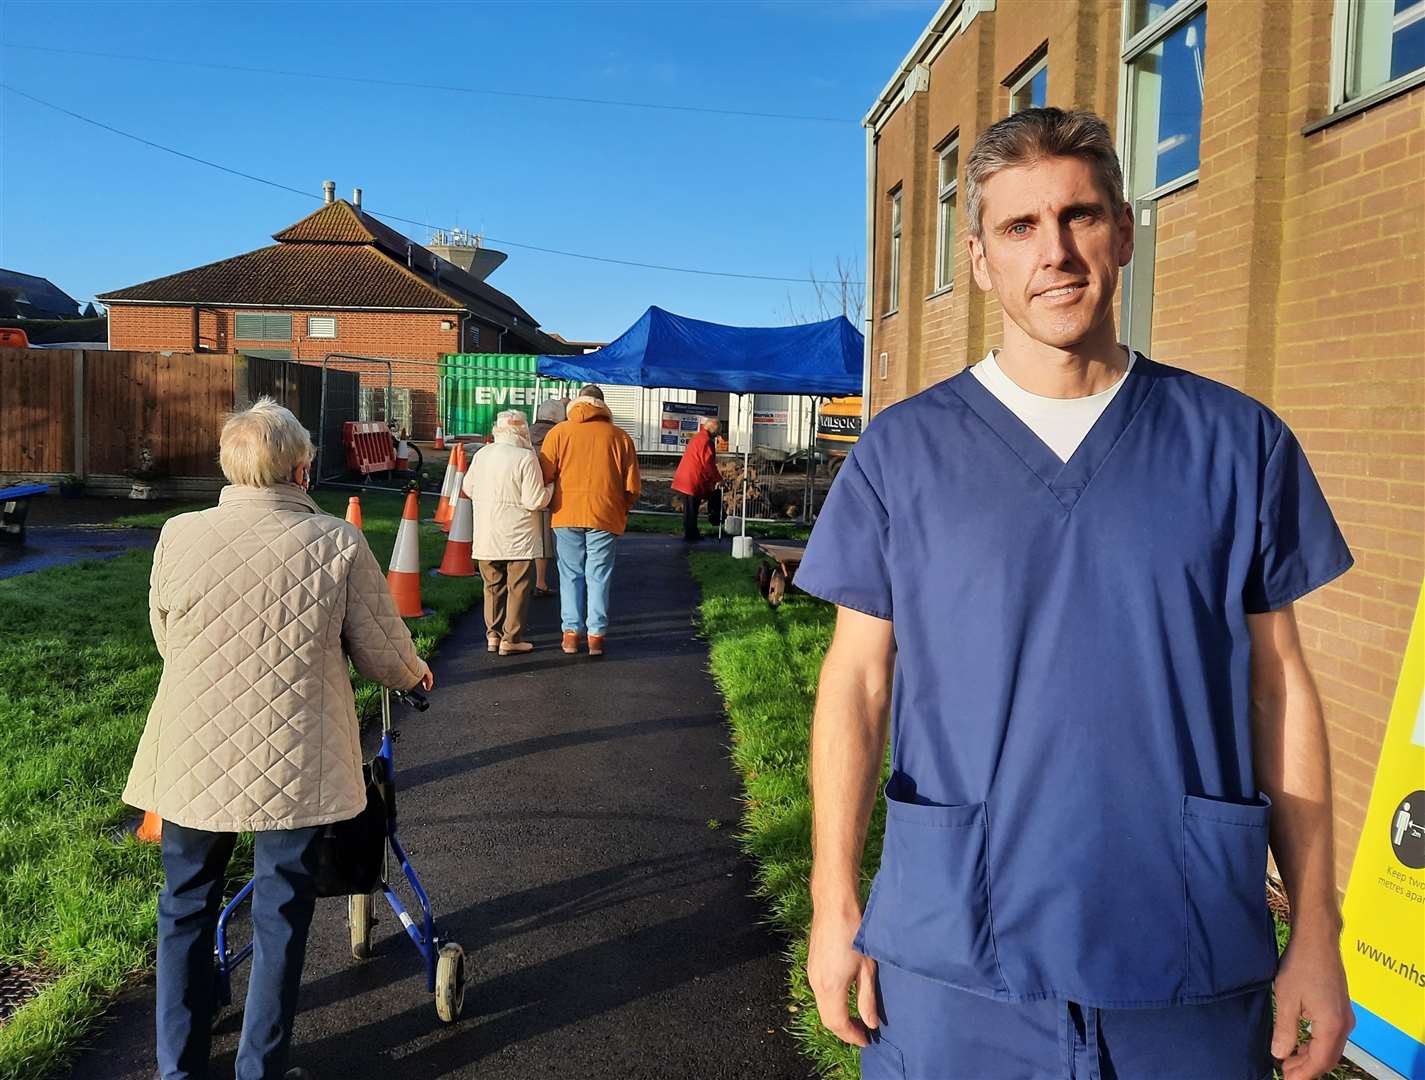 Jeremy Carter stood next to the queue of people waiting for a vaccine